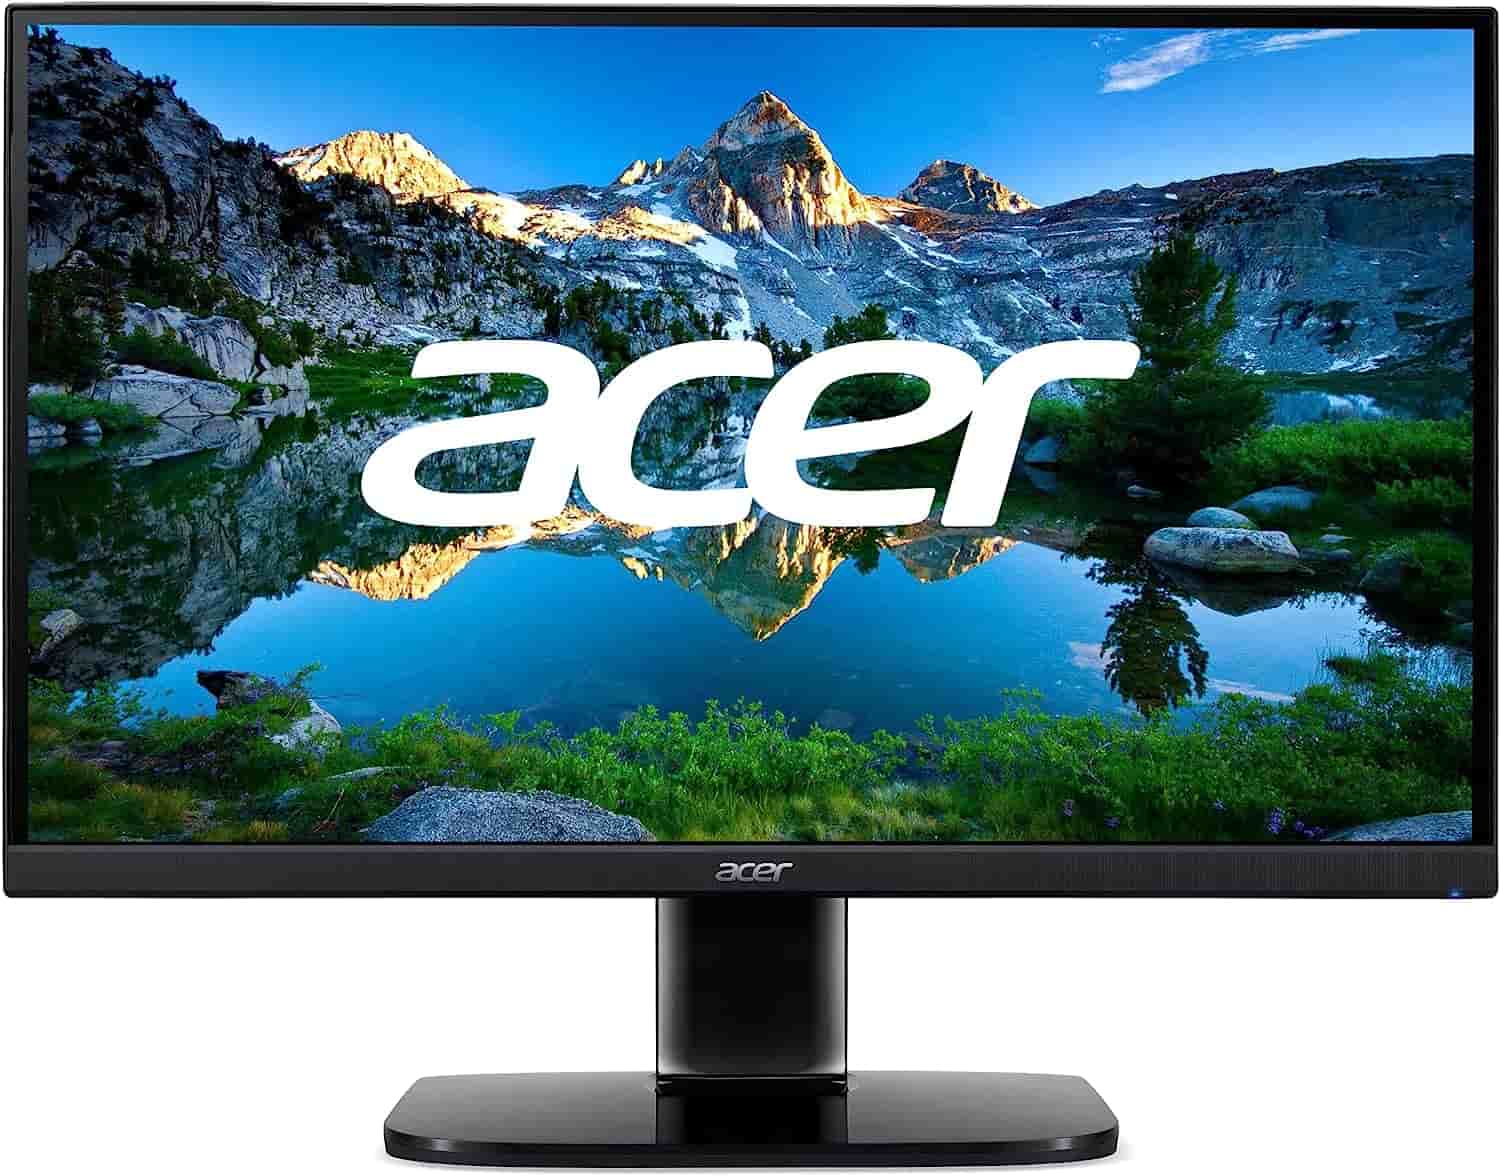 Best 1080p Gaming Monitor: Acer KB272